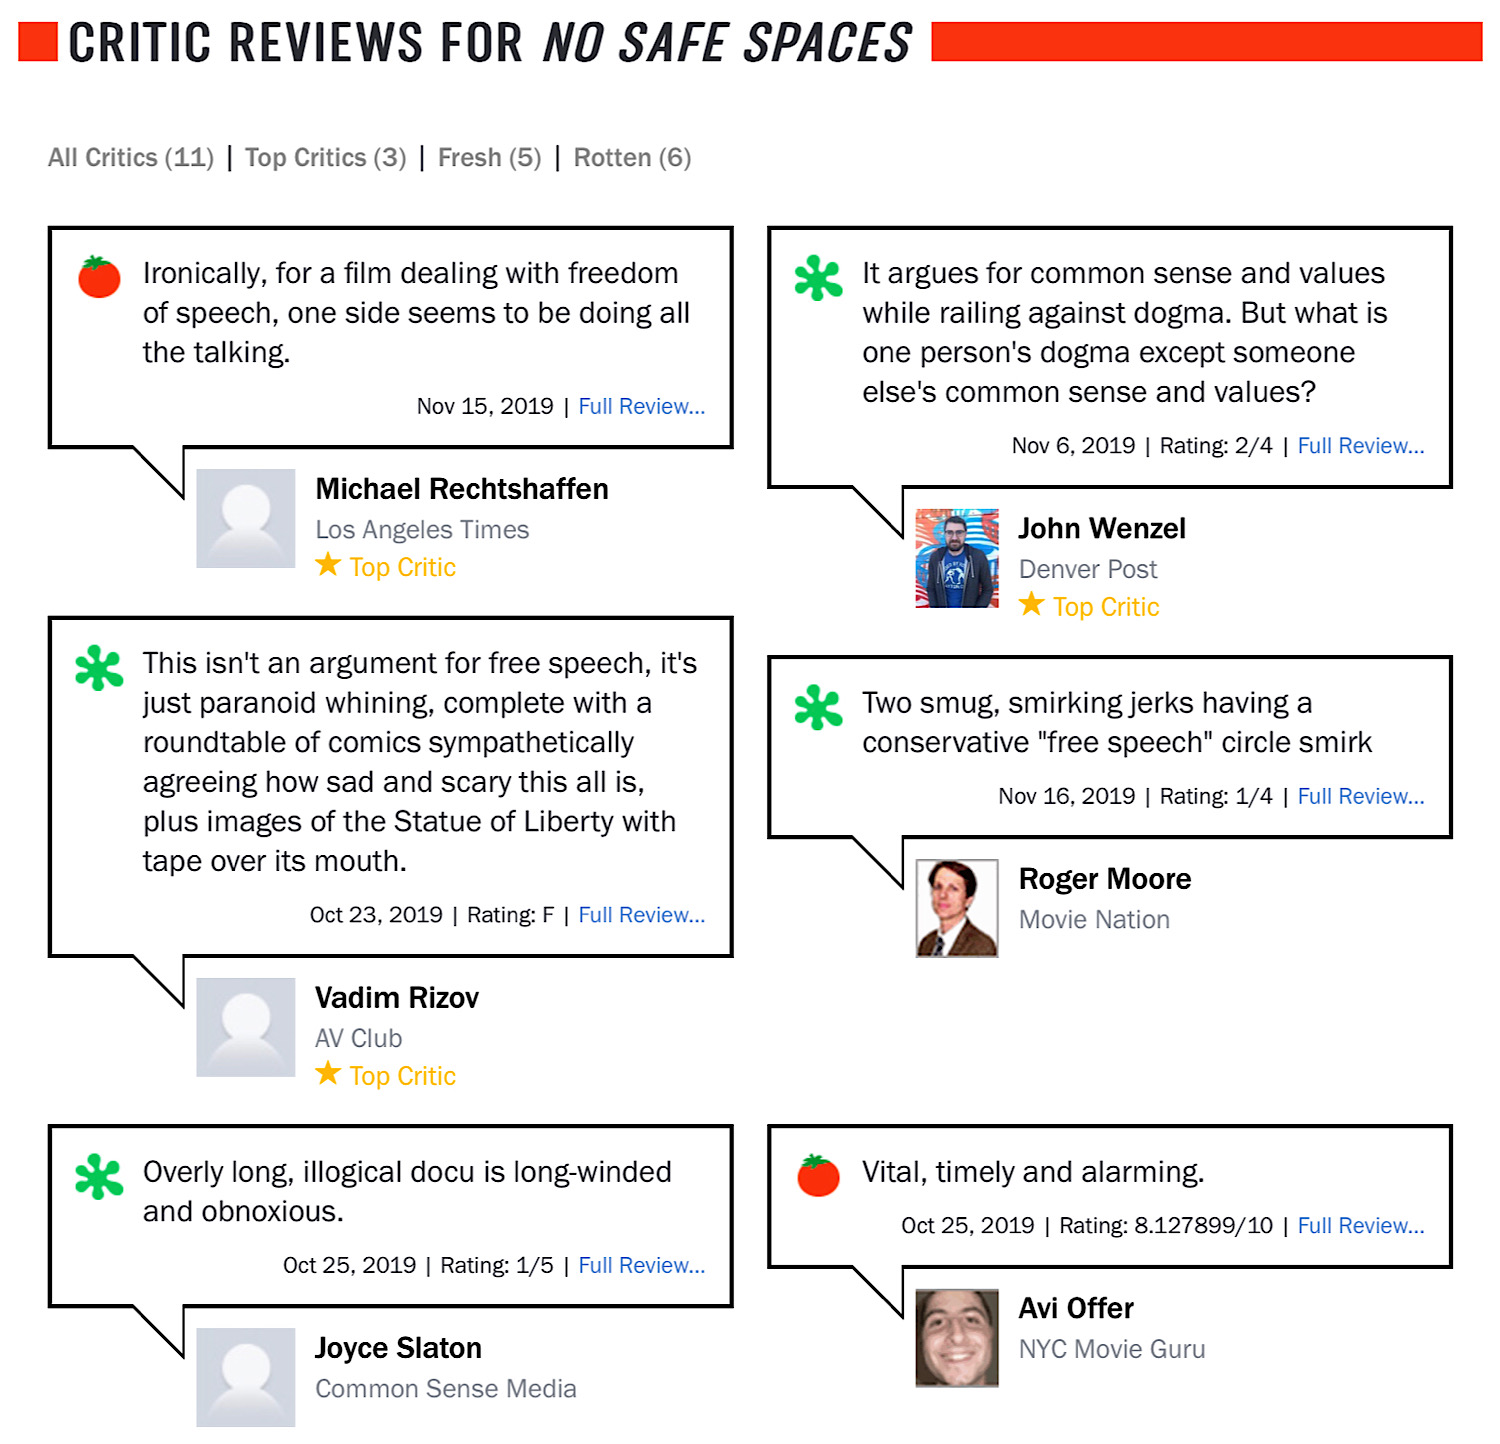 Featured critic reviews for No Safe Spaces on Rotten Tomatoes.